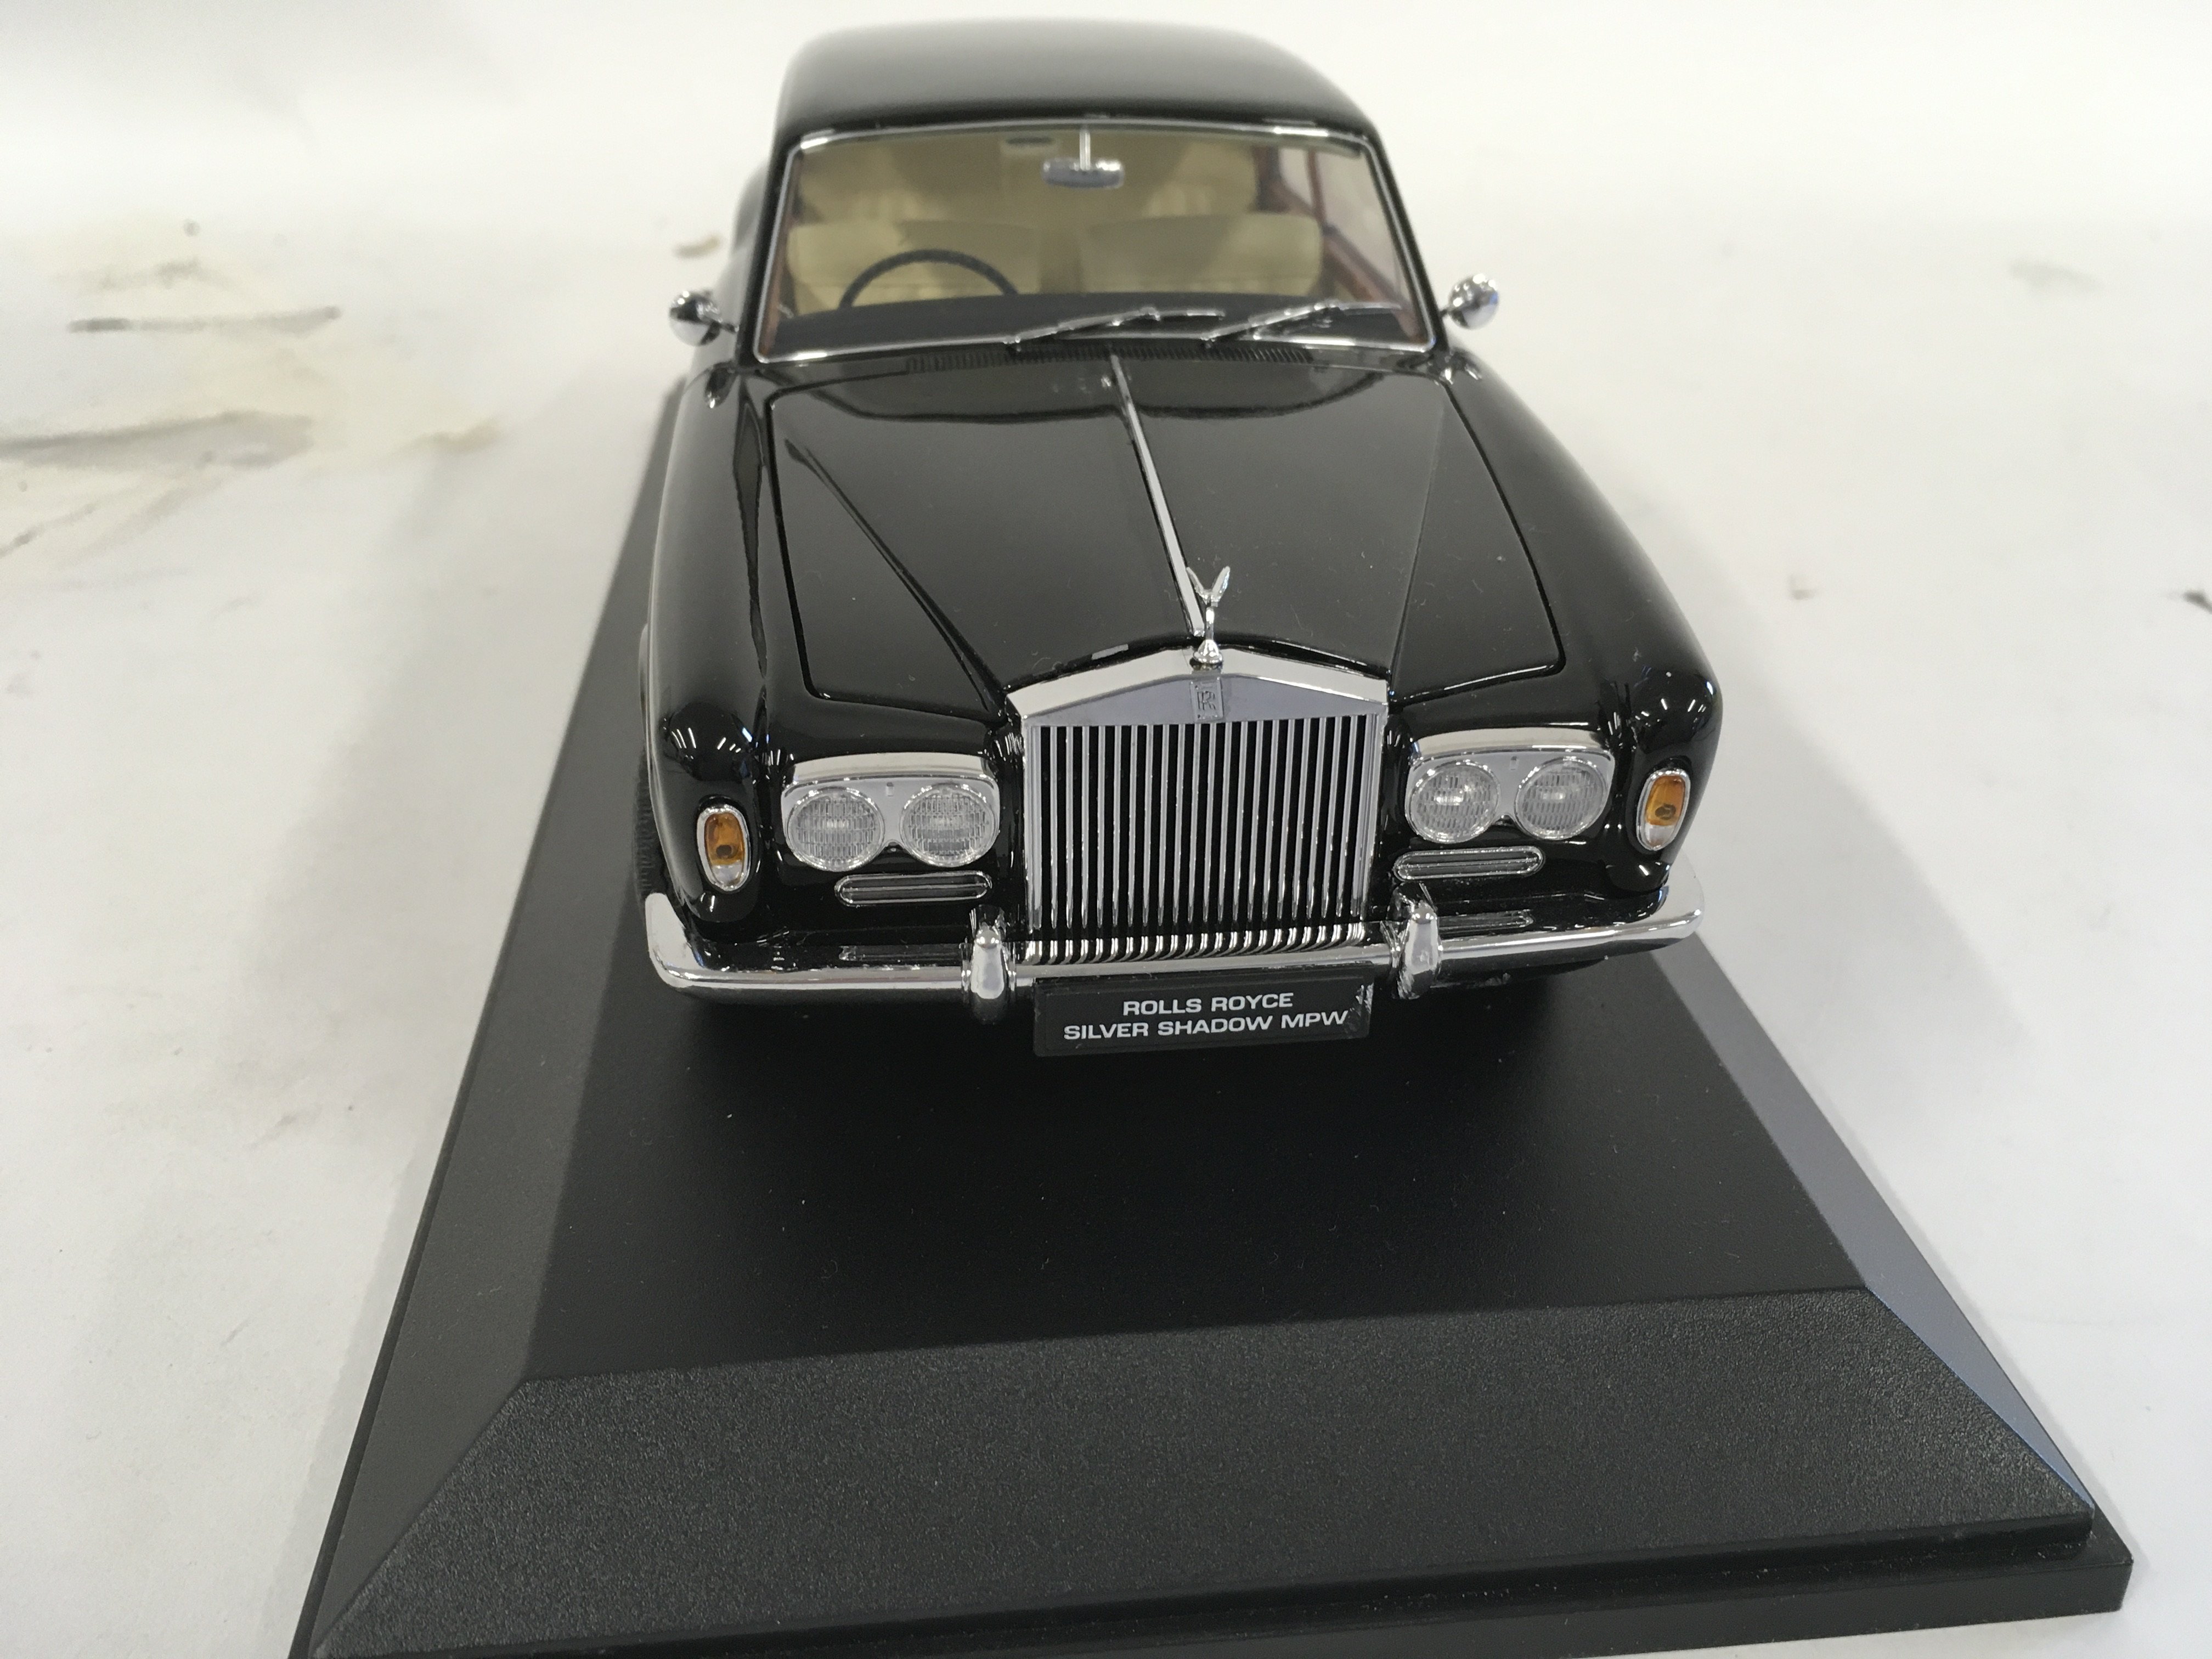 Three precision model cars by Franklin Mint both in presentation cases. Cars are 2 x RollsRoyce - Image 10 of 10